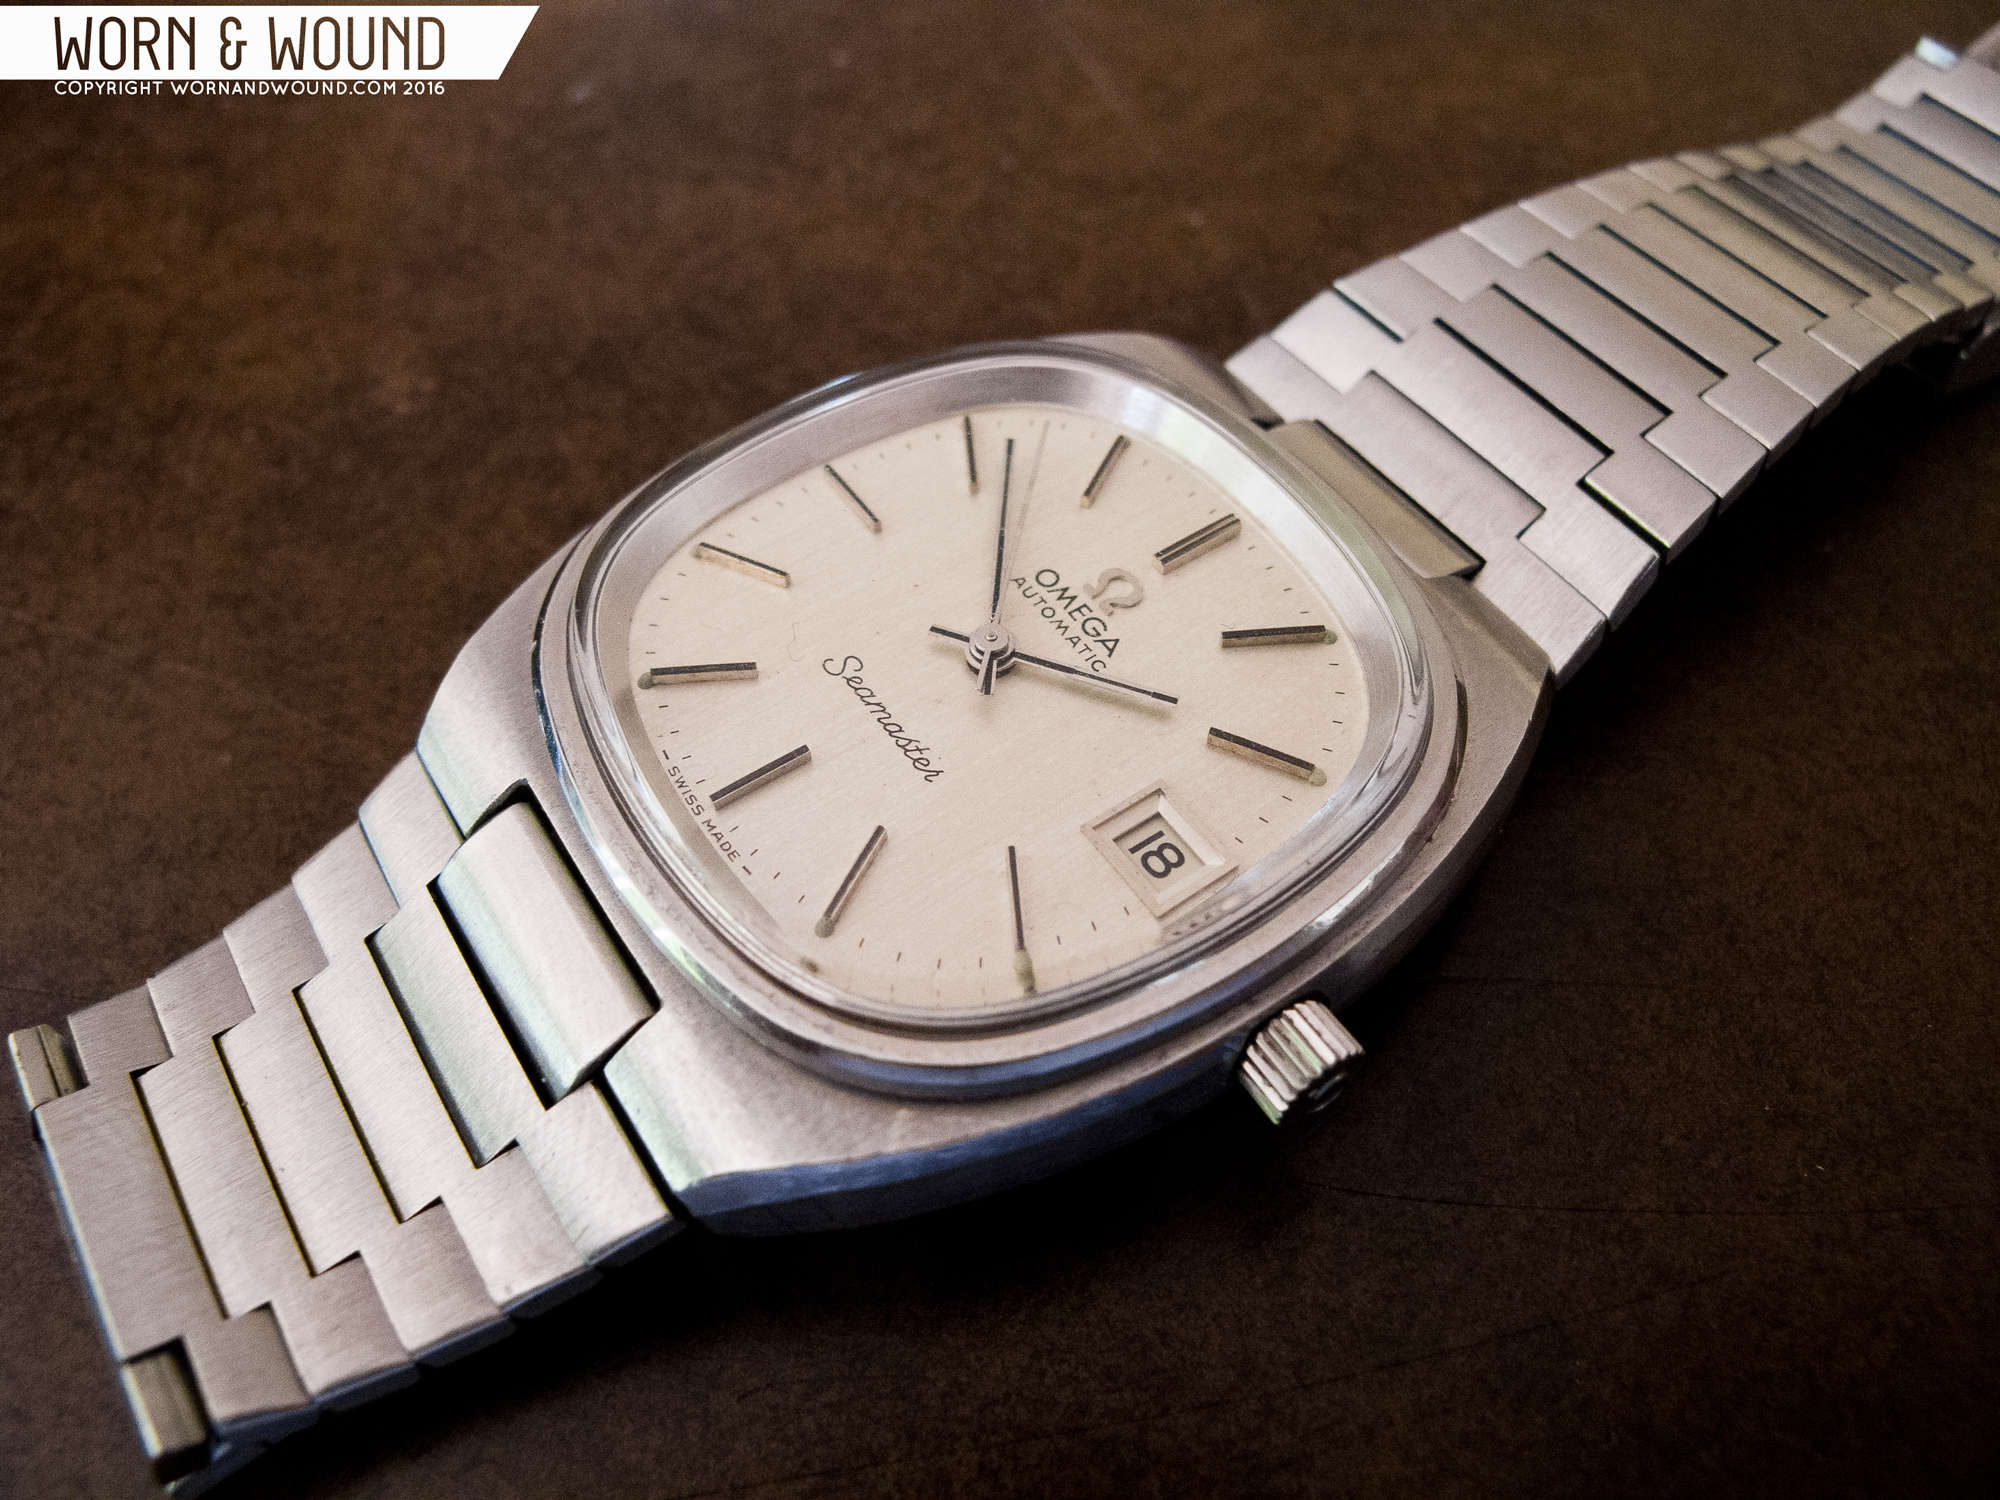 Affordable Vintage: Head-to-Head With the Omega Seamaster ref. 166.0240 ...